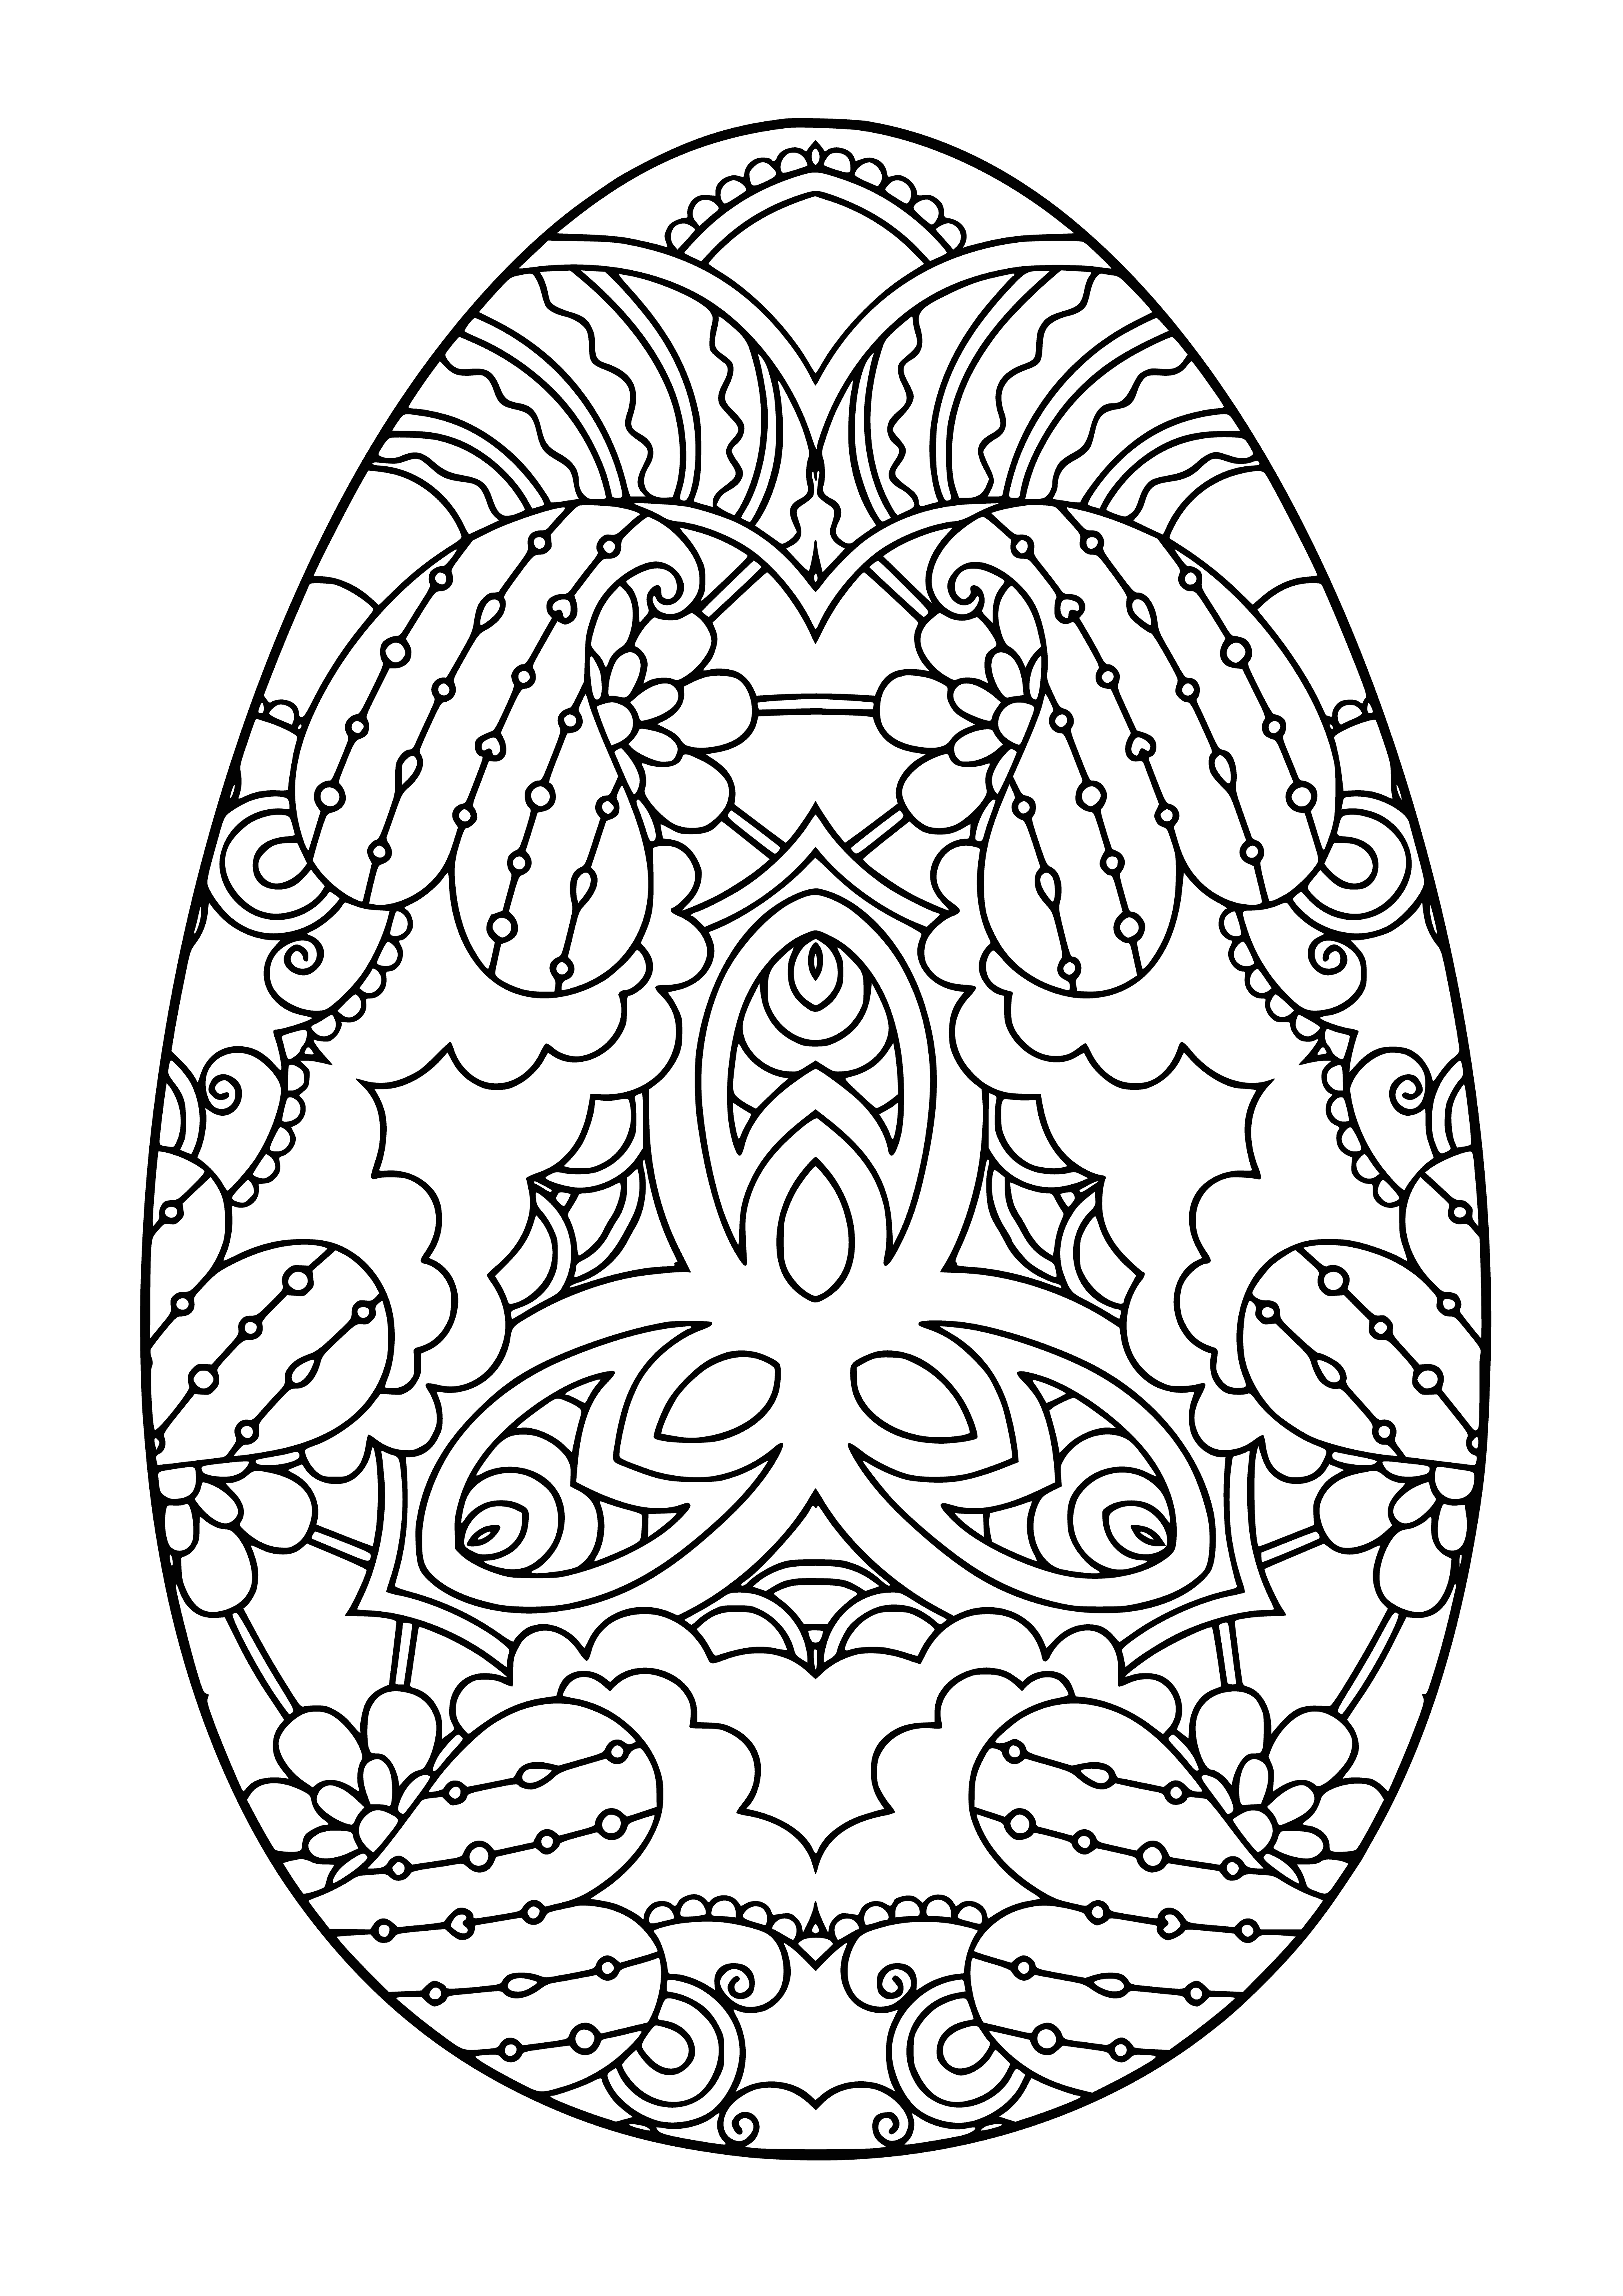 coloring page: 3 Easter eggs on coloring page w/ bunny nearby. Different colors and patterns. #Easter #ColoringPage #Bunny #Eggs